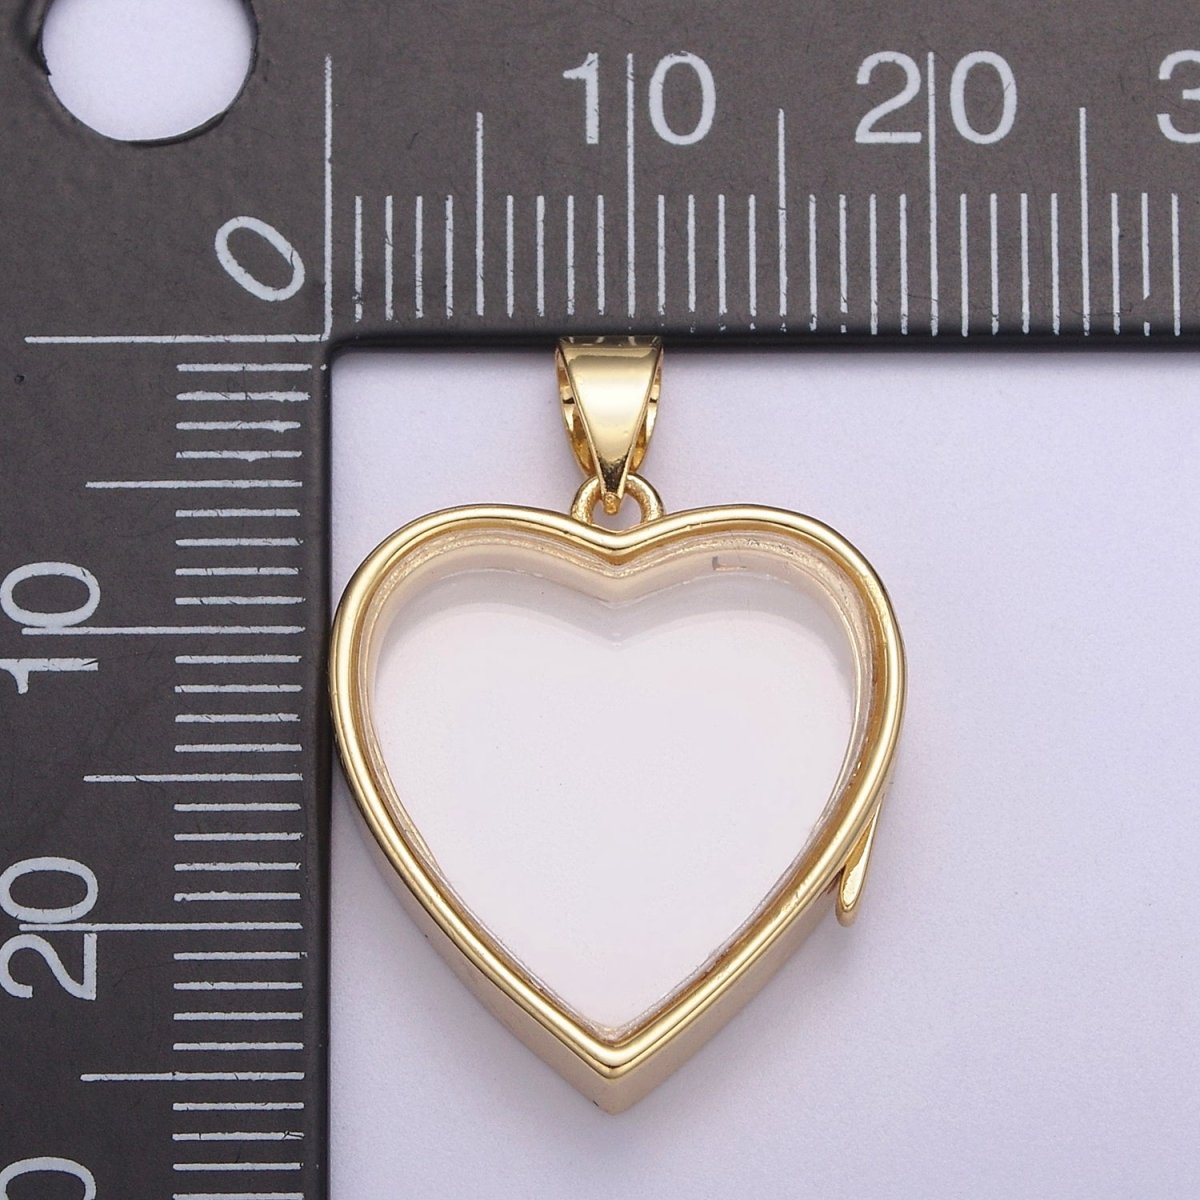 Heart Locket Necklace Clear Glass Crystal Container Locket Gold Gemstone Pendant Necklace Fillable Jewelry for Crystal Jewelry Making Supply N-581 - DLUXCA